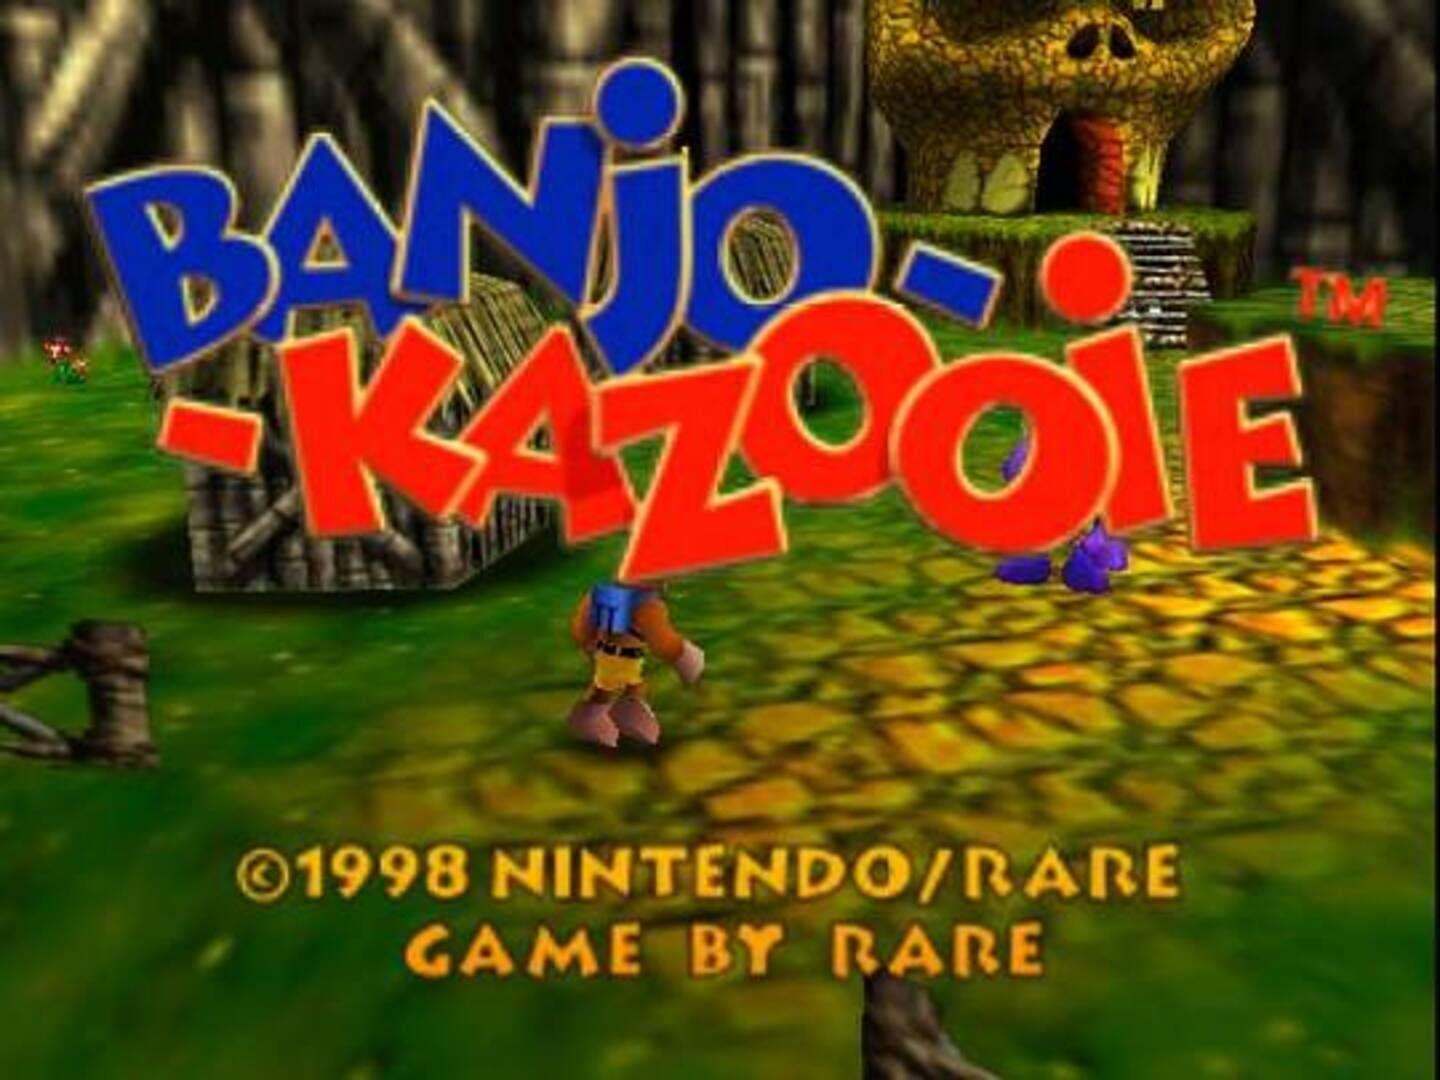 If you want widescreen banjo kazooie on your Everdrive, here you go: : r/n64